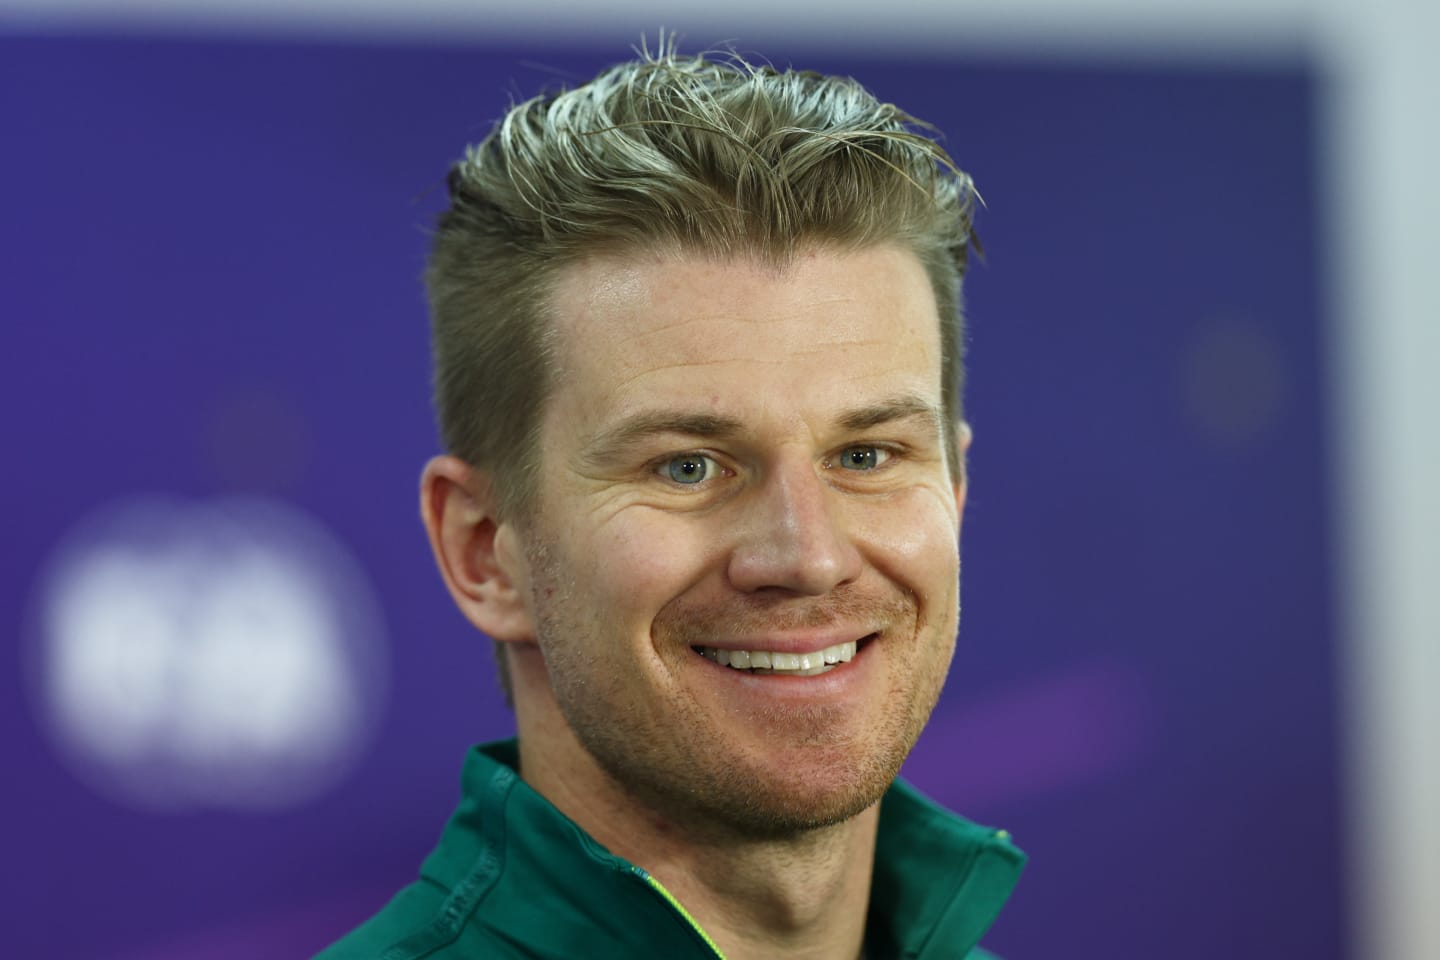 BAHRAIN, BAHRAIN - MARCH 18: Nico Hulkenberg of Germany and Aston Martin F1 Team looks on in the Drivers Press Conference before practice ahead of the F1 Grand Prix of Bahrain at Bahrain International Circuit on March 18, 2022 in Bahrain, Bahrain. (Photo by Lars Baron/Getty Images)